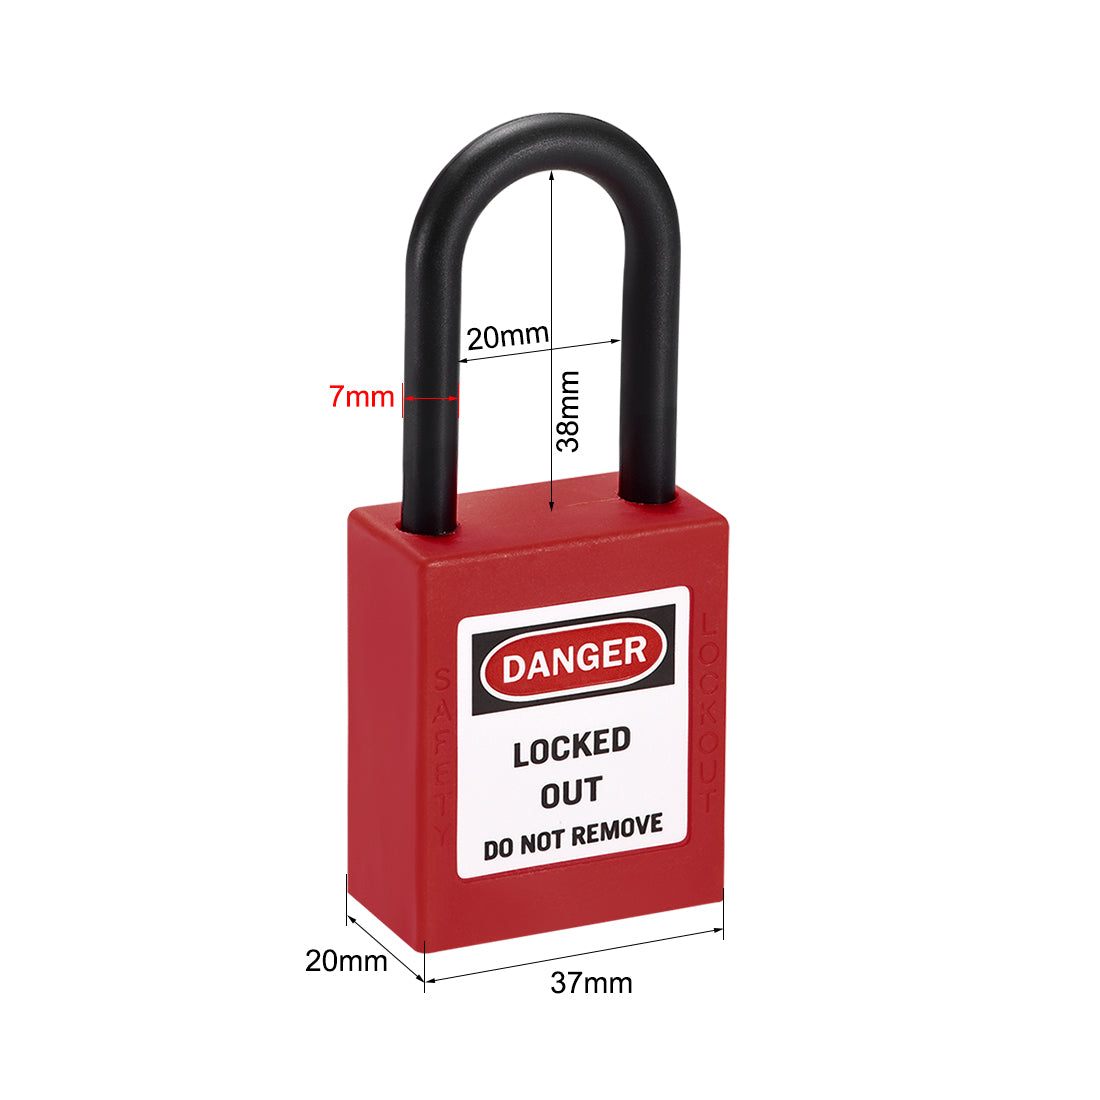 uxcell Uxcell Lockout Tagout Safety Padlock 38mm Nylon Shackle Keyed Different Red